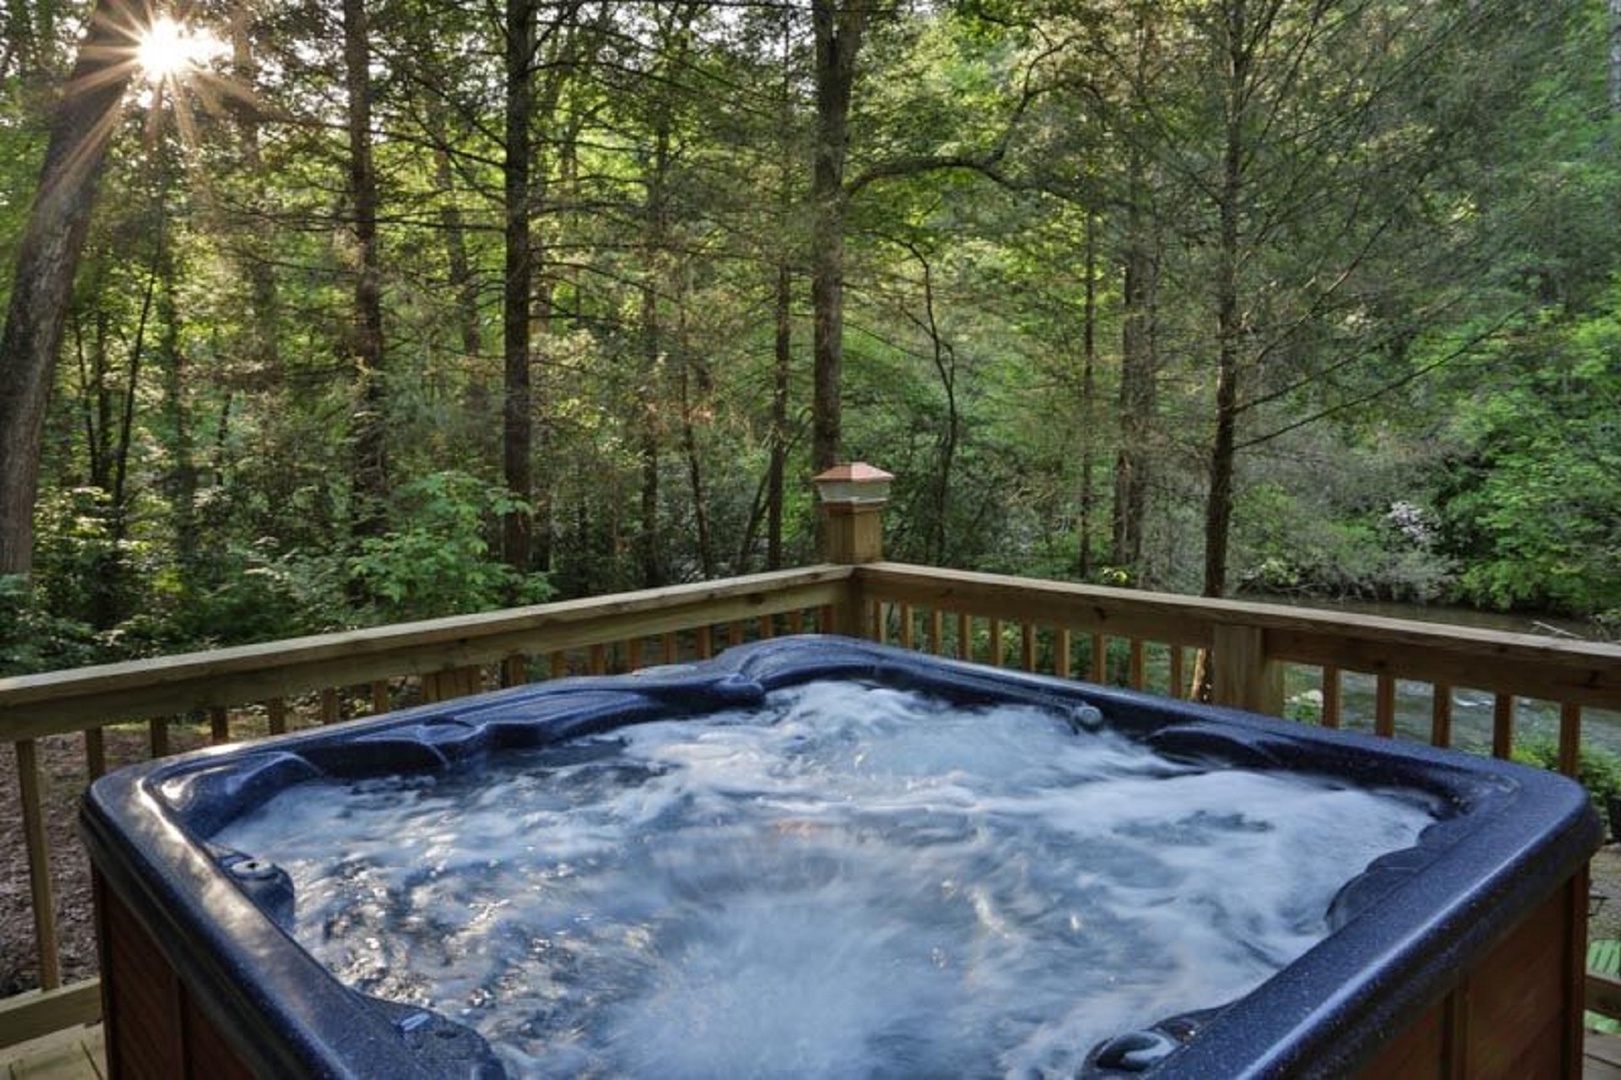 Hot Tub overlooks the River